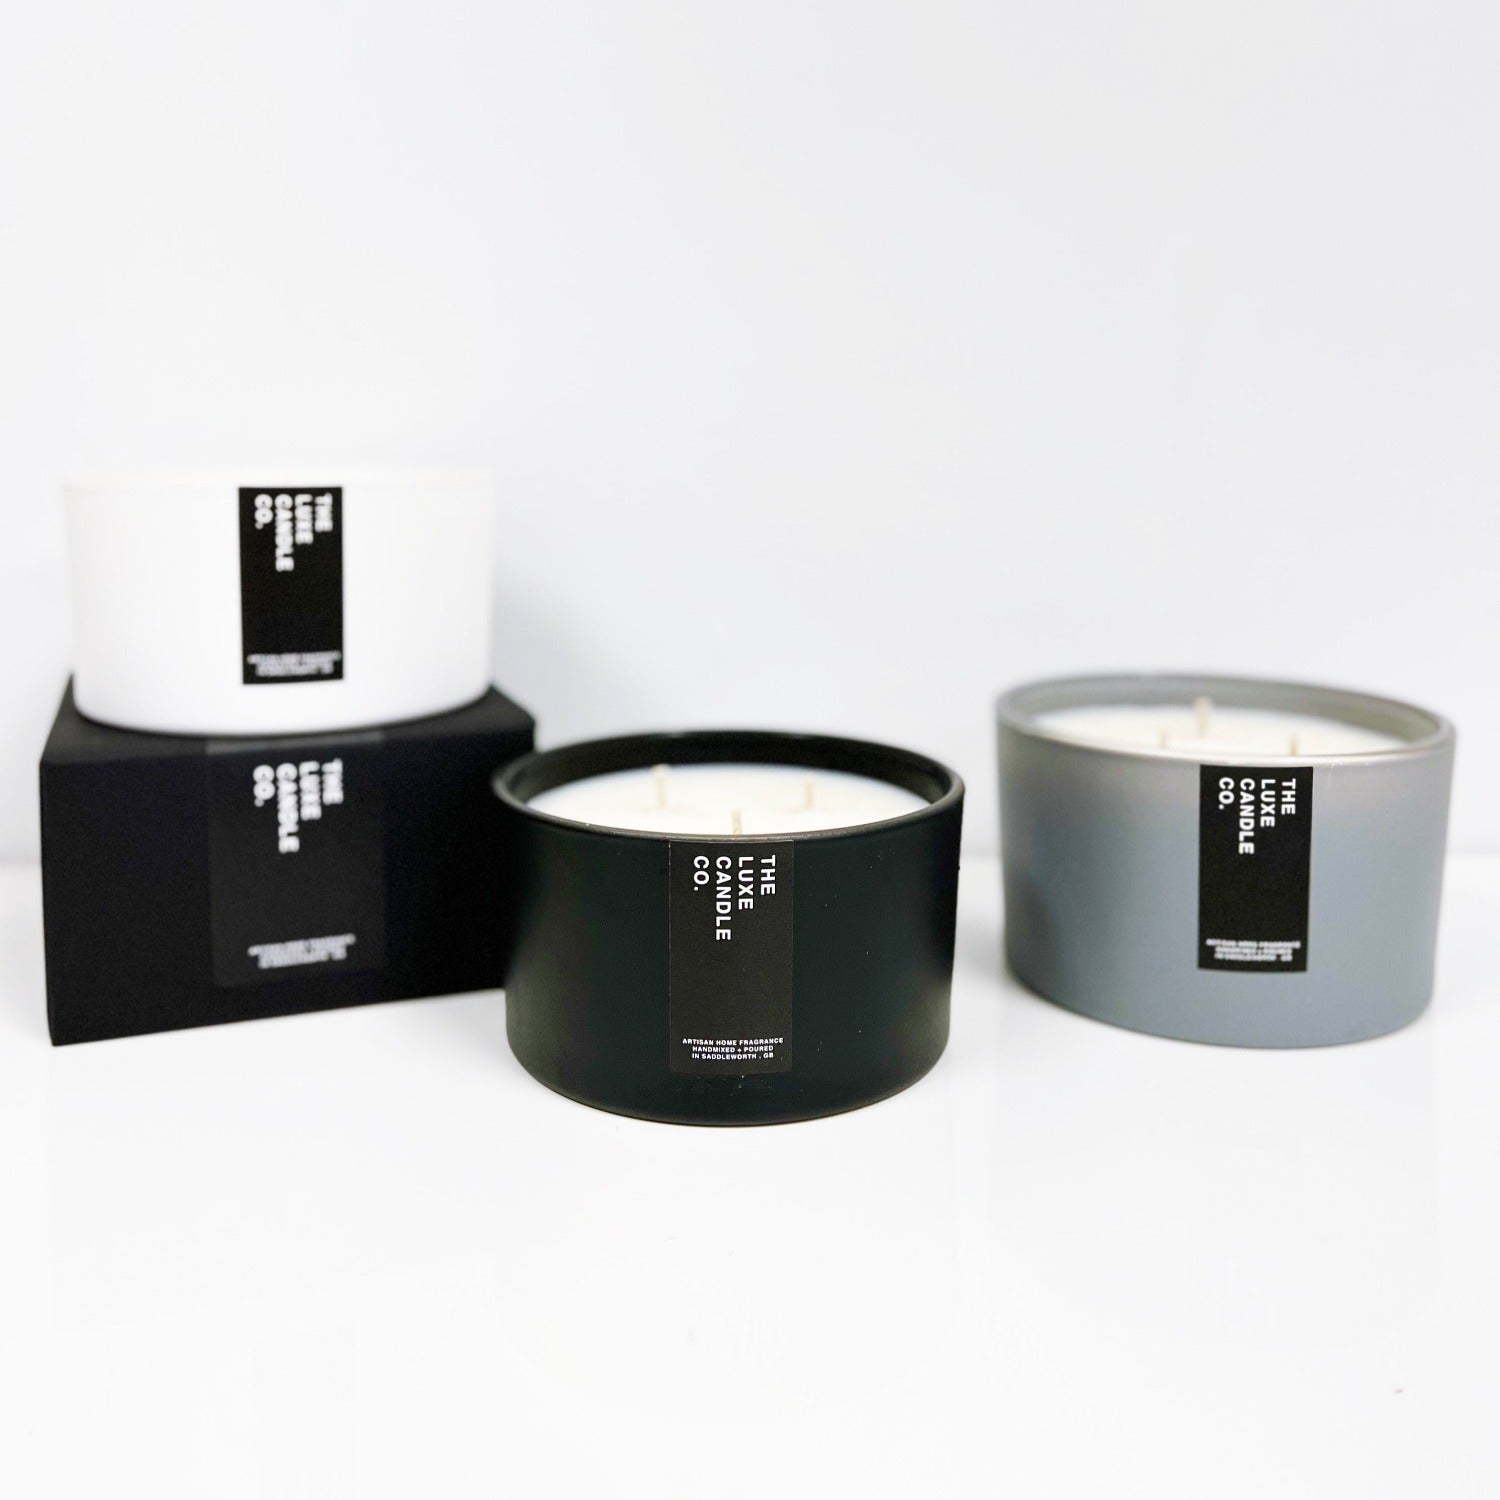 Multiwick scented large candles - white black and grey 3 wicks soy candle by The Luxe Candle Co